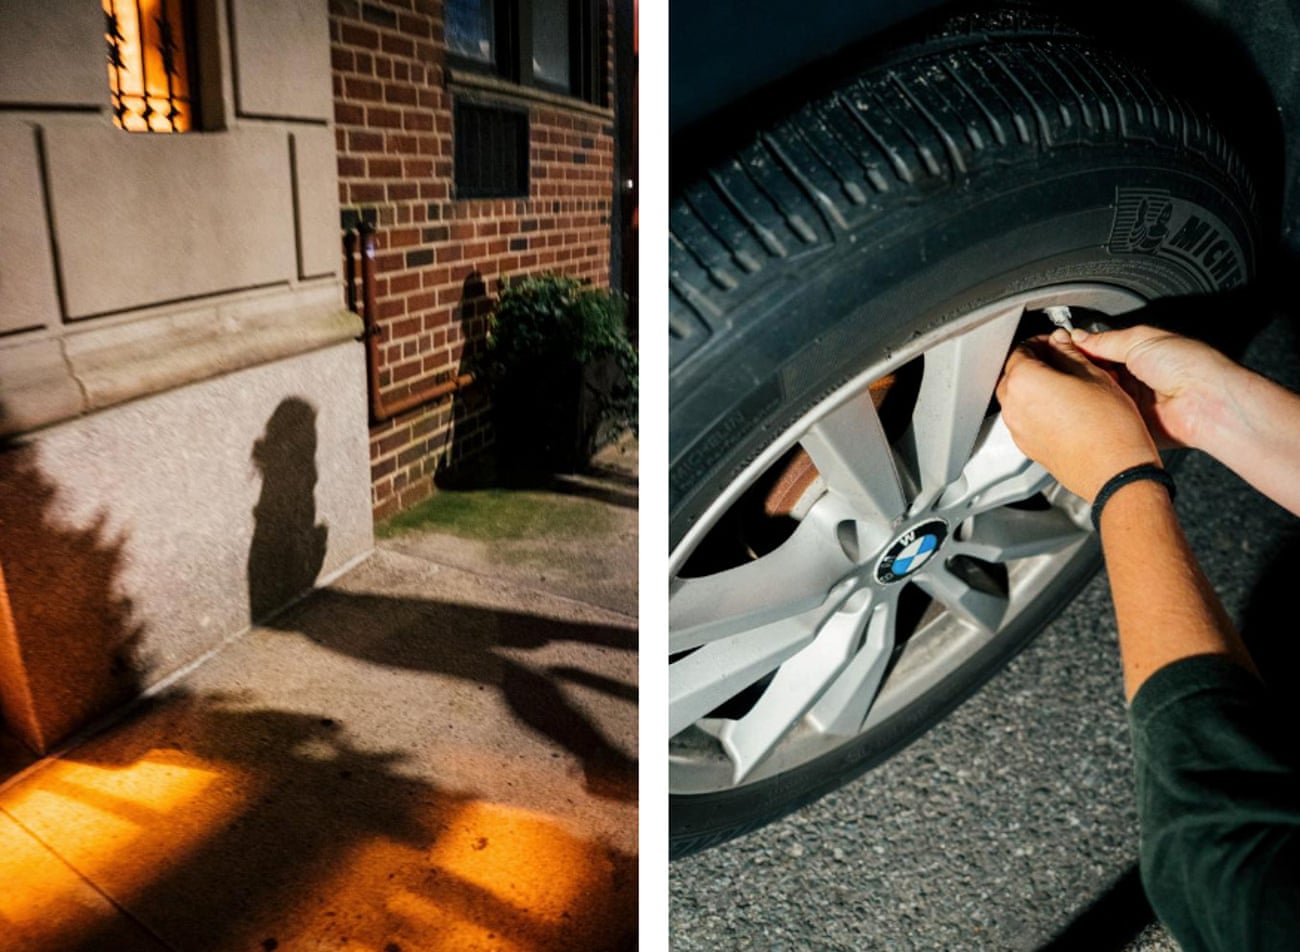 Left: A shadow of a person at night.  Right: Deflating hands from a BMW tyre